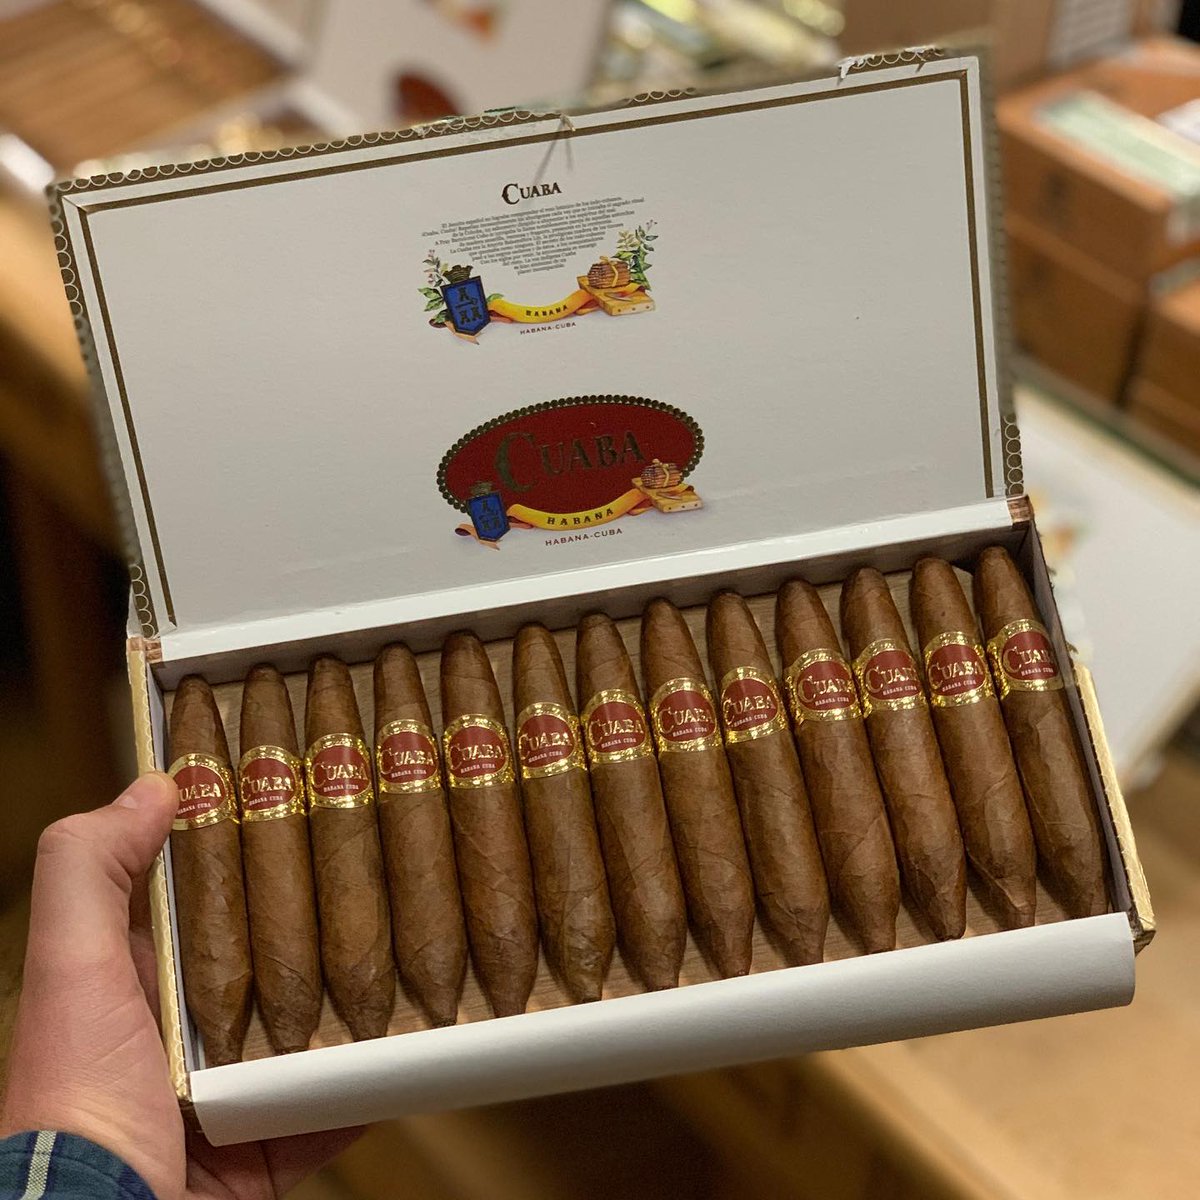 Cuaba Divinos is 43 ring Petit Perfecto with lovely honey, citrus, nut, salt, coffee, cinnamon, shortbread, chocolate and wood aromas dominant 🇨🇺👍🔥